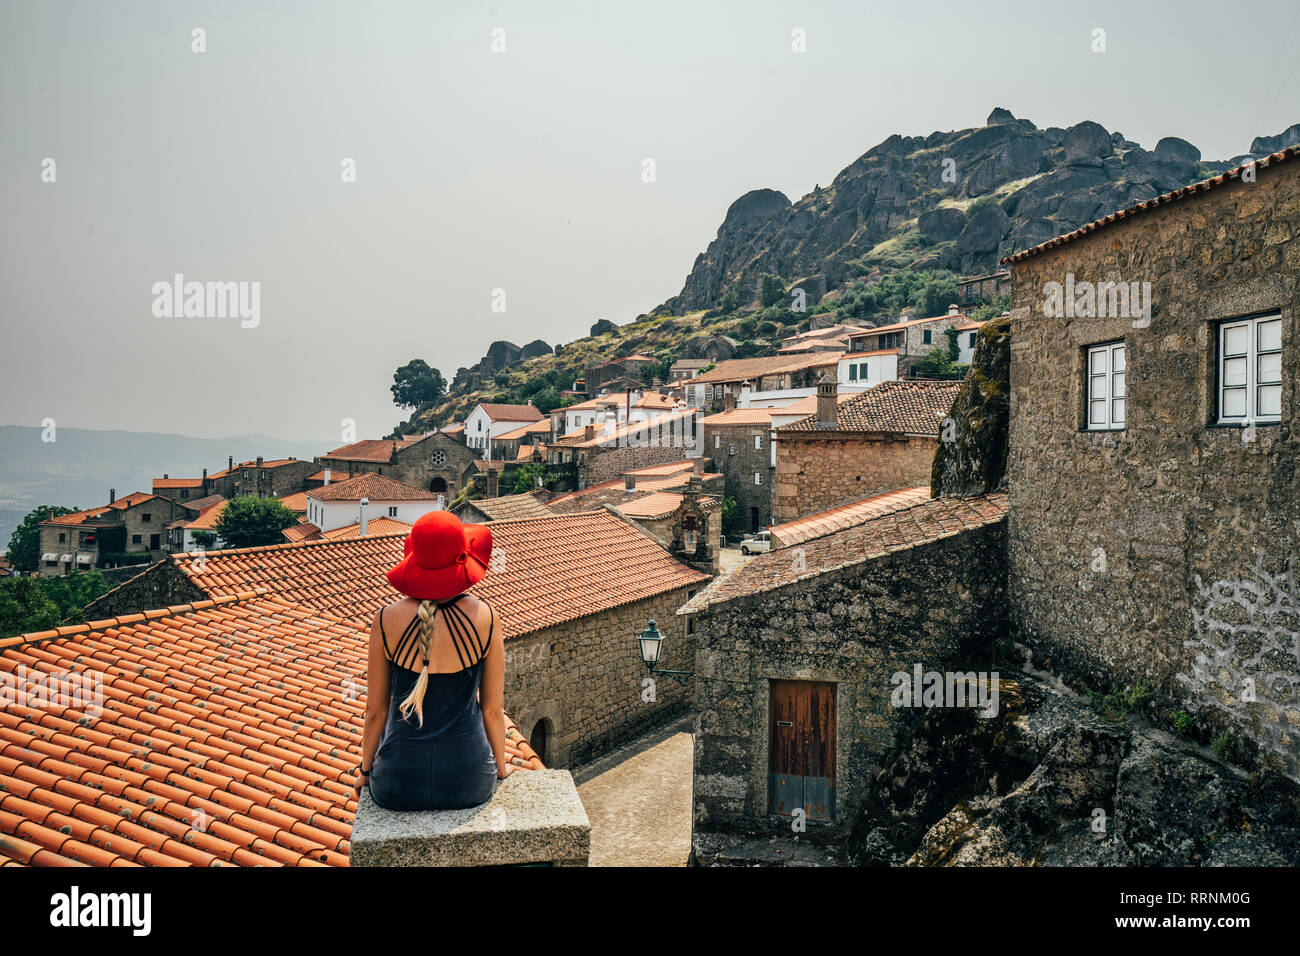 Woman in red hat looking at bâtiments sur colline, Monsanto, Portugal Banque D'Images